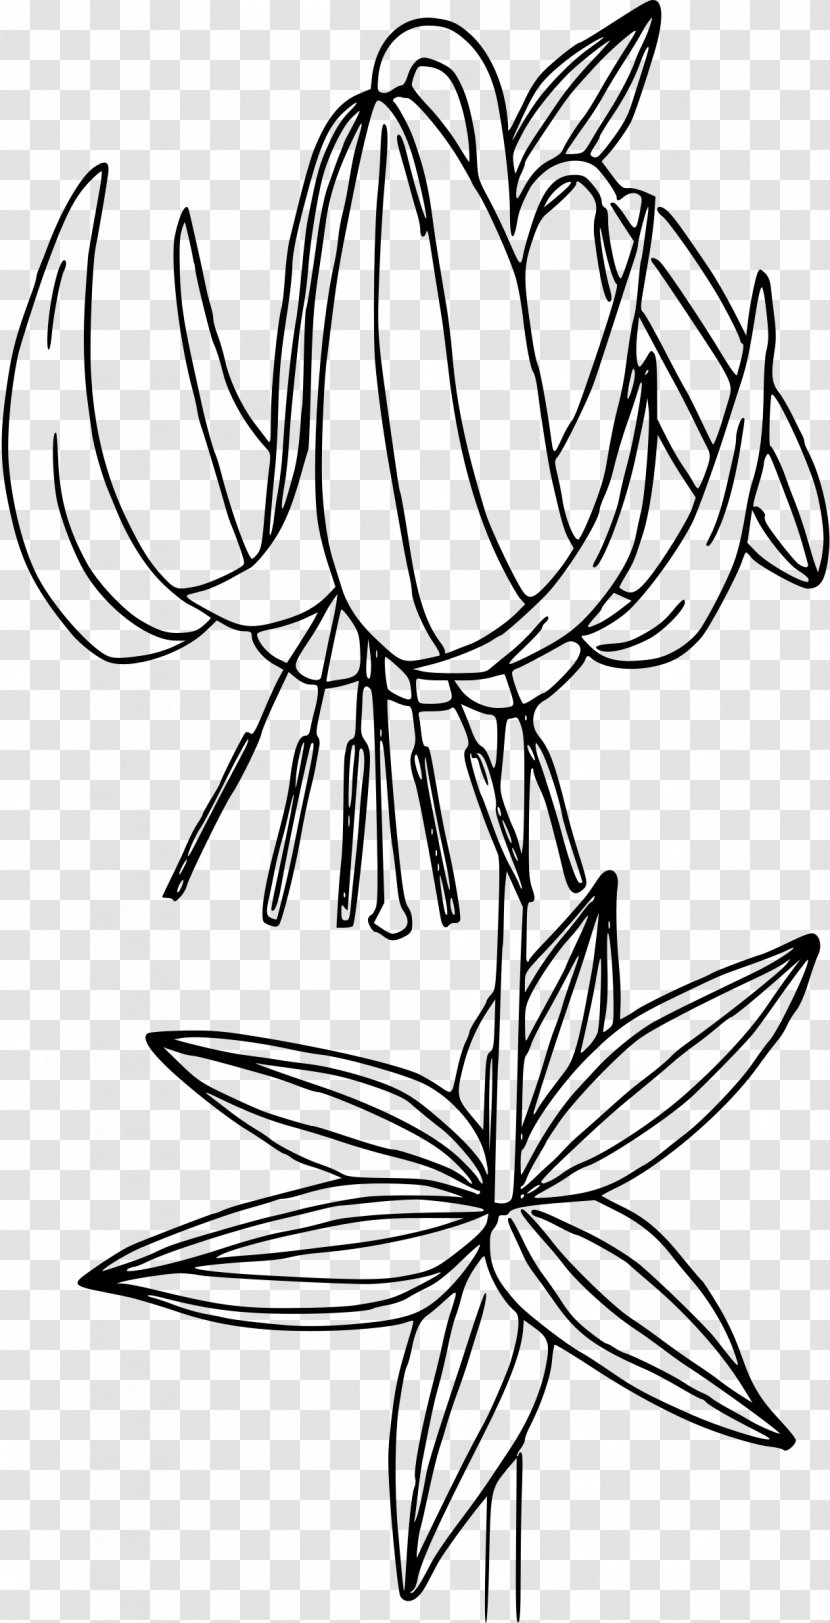 Visual Arts Black And White - Plant - Callalily Transparent PNG